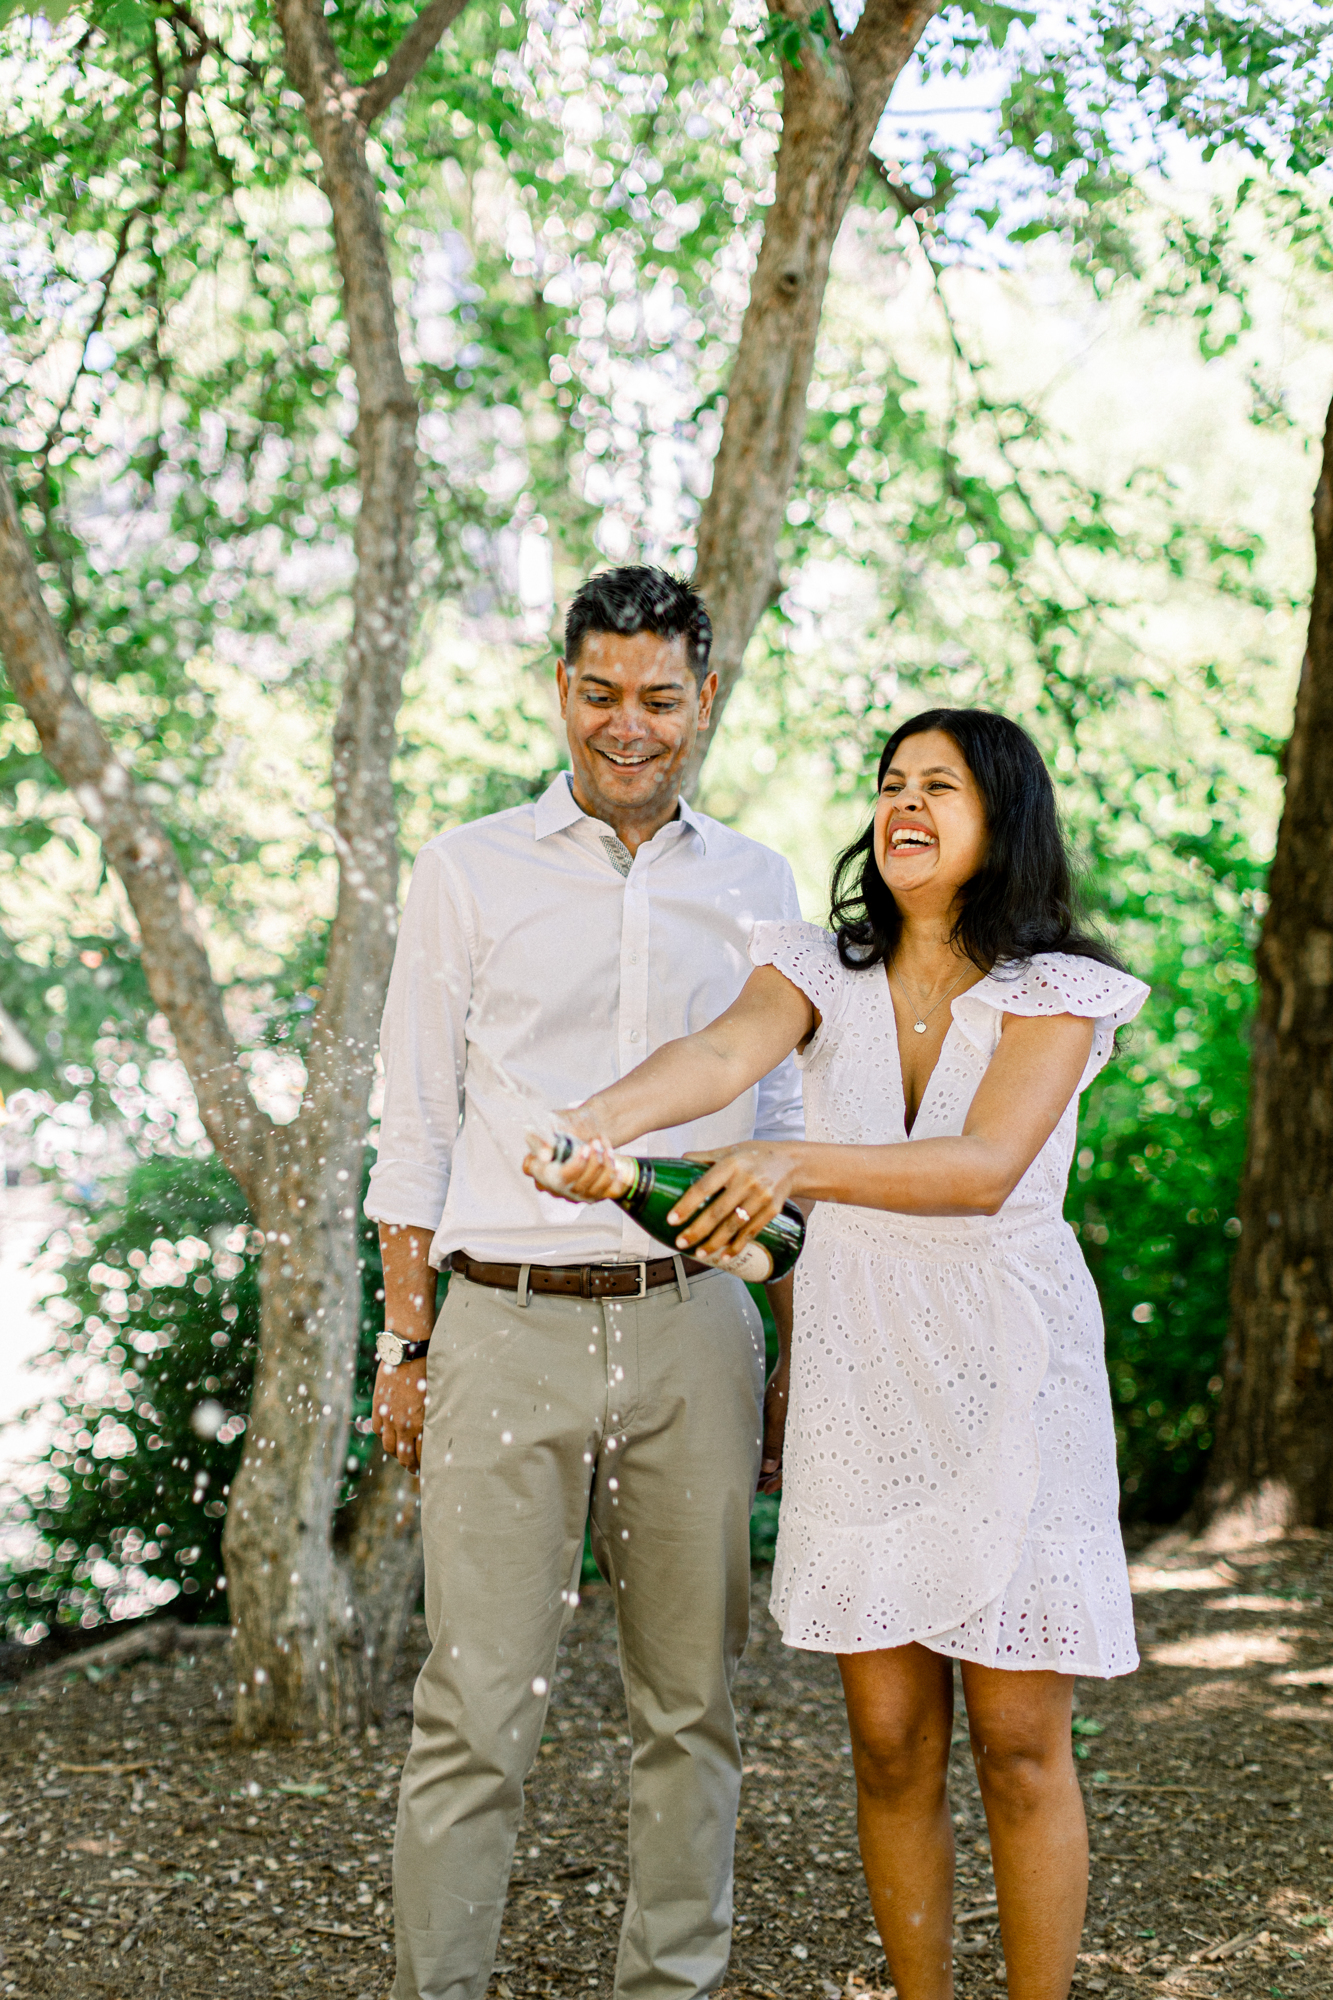 Vibrant Carl Shurz Park Engagement Photos in Summery NYC